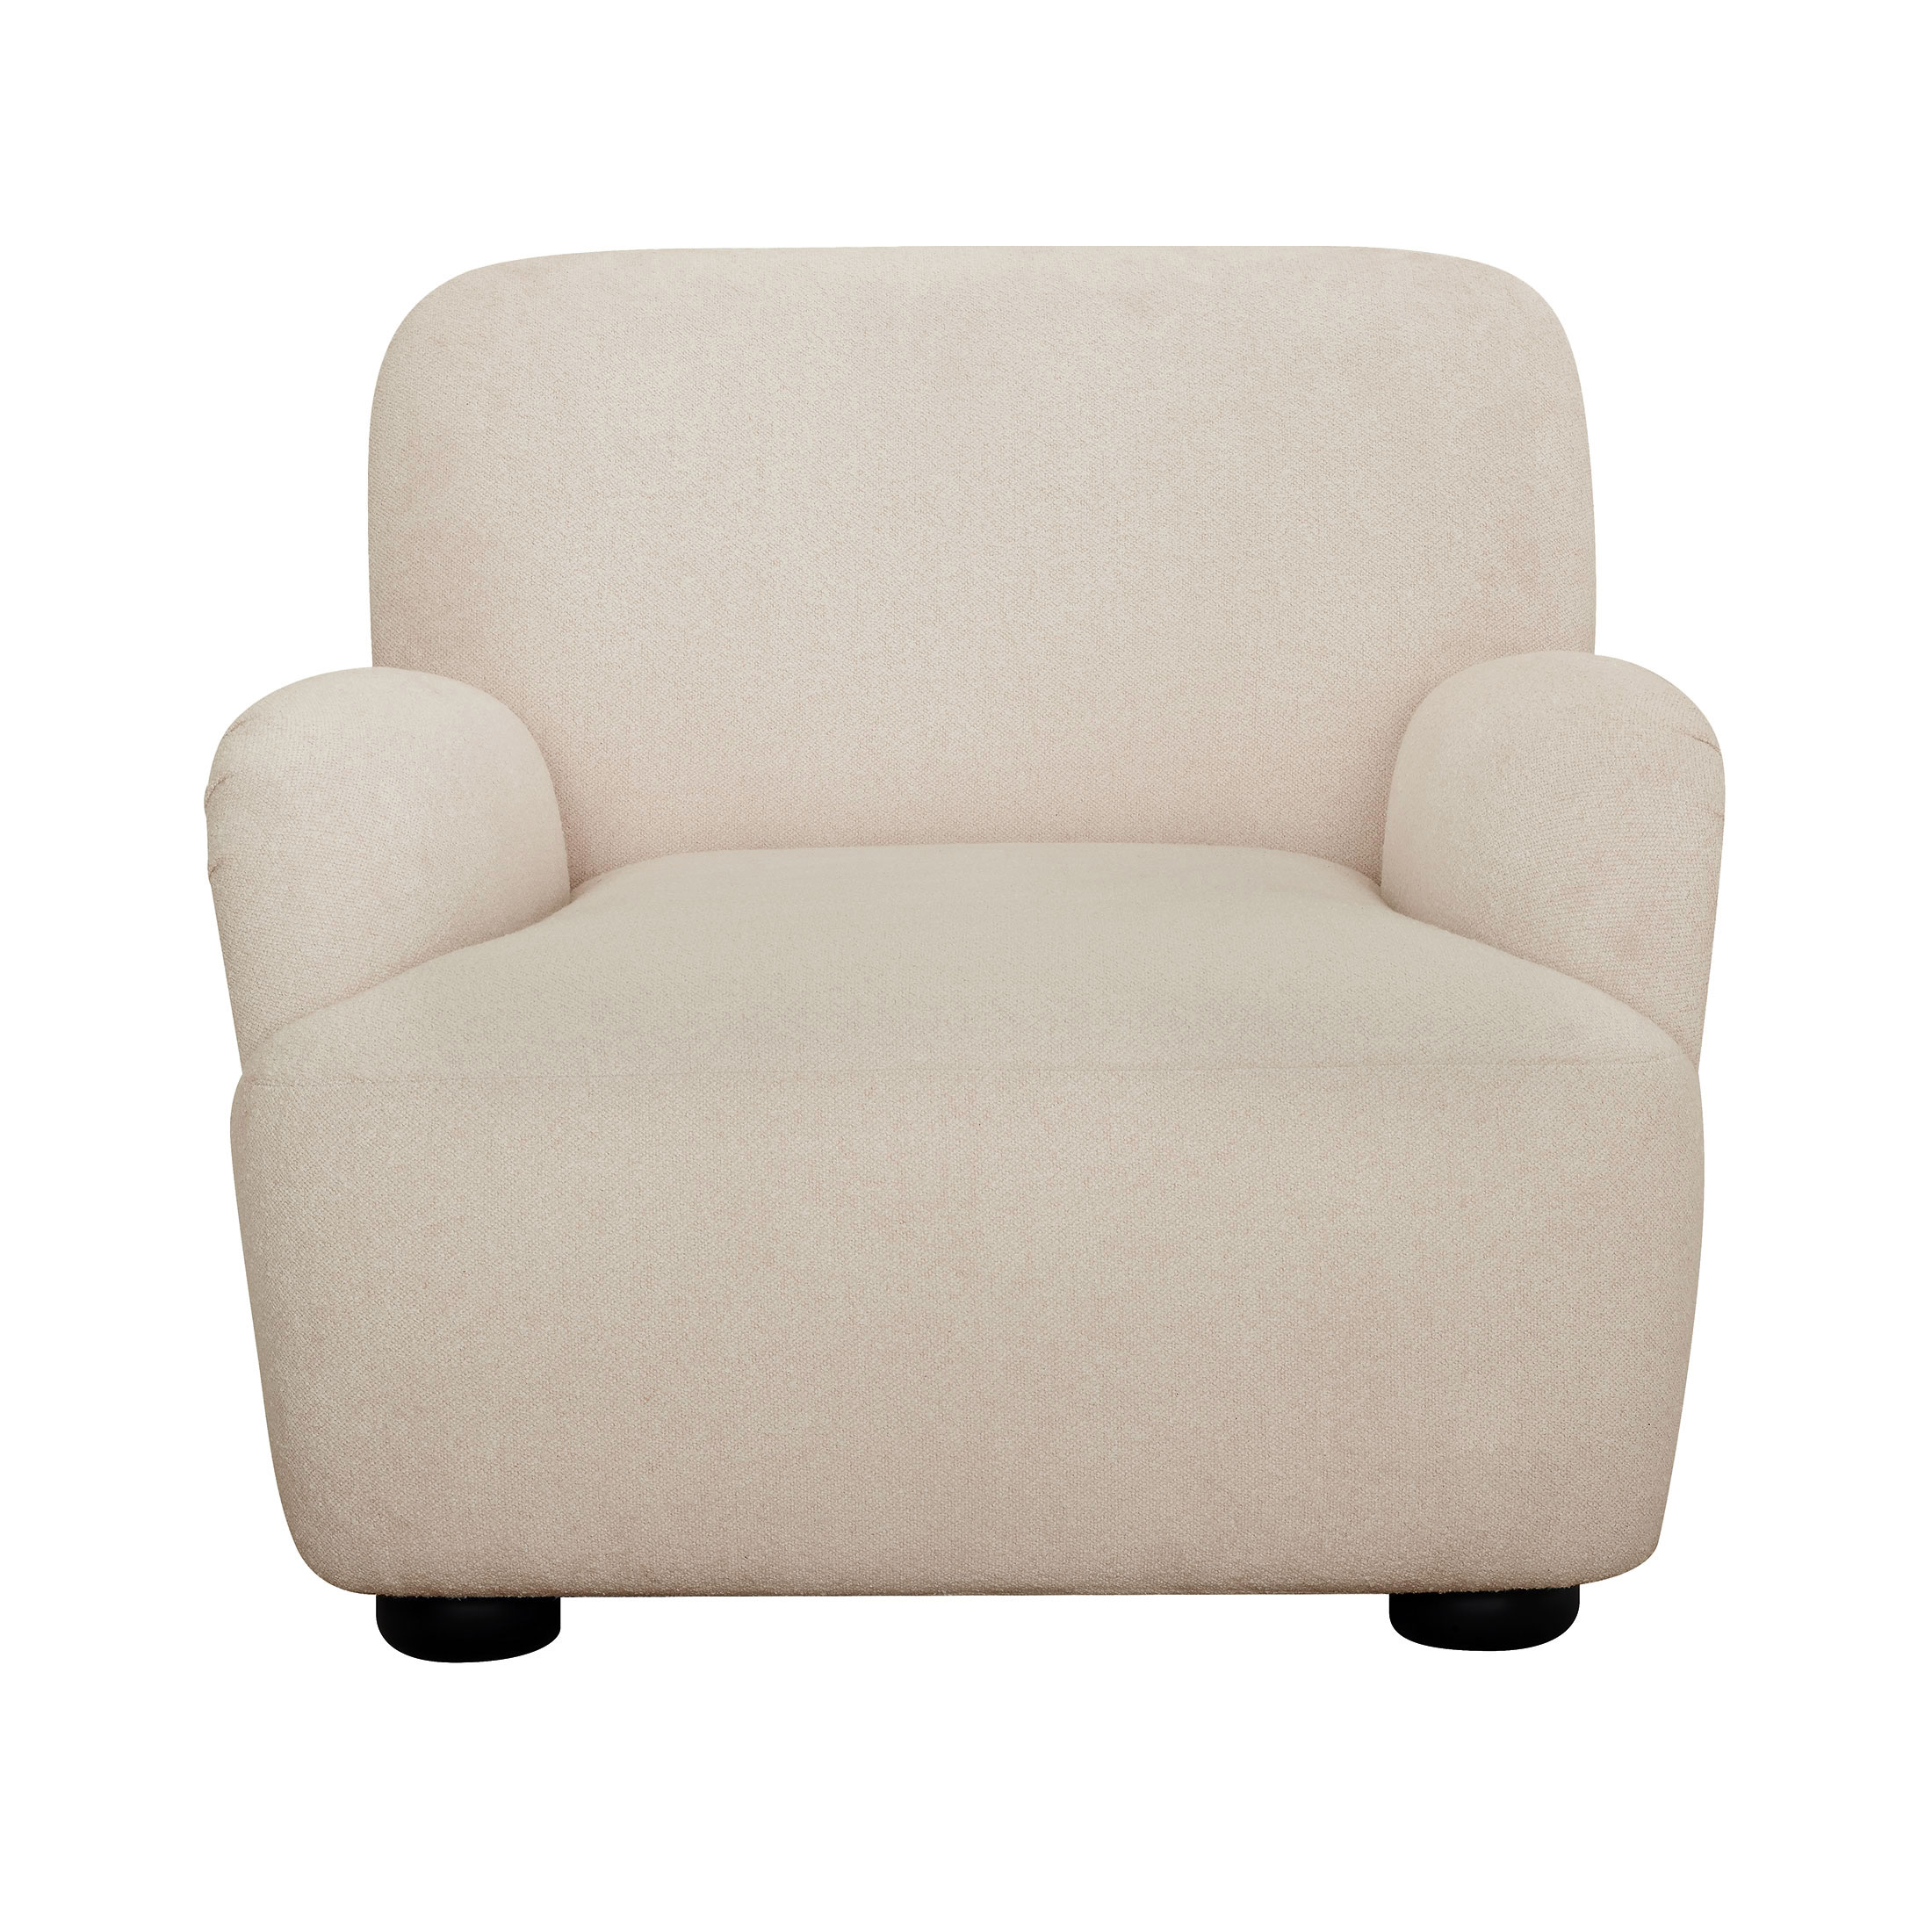 Better Homes & Gardens Waylen Accent Chair, by Dave & Jenny Marrs - image 3 of 8